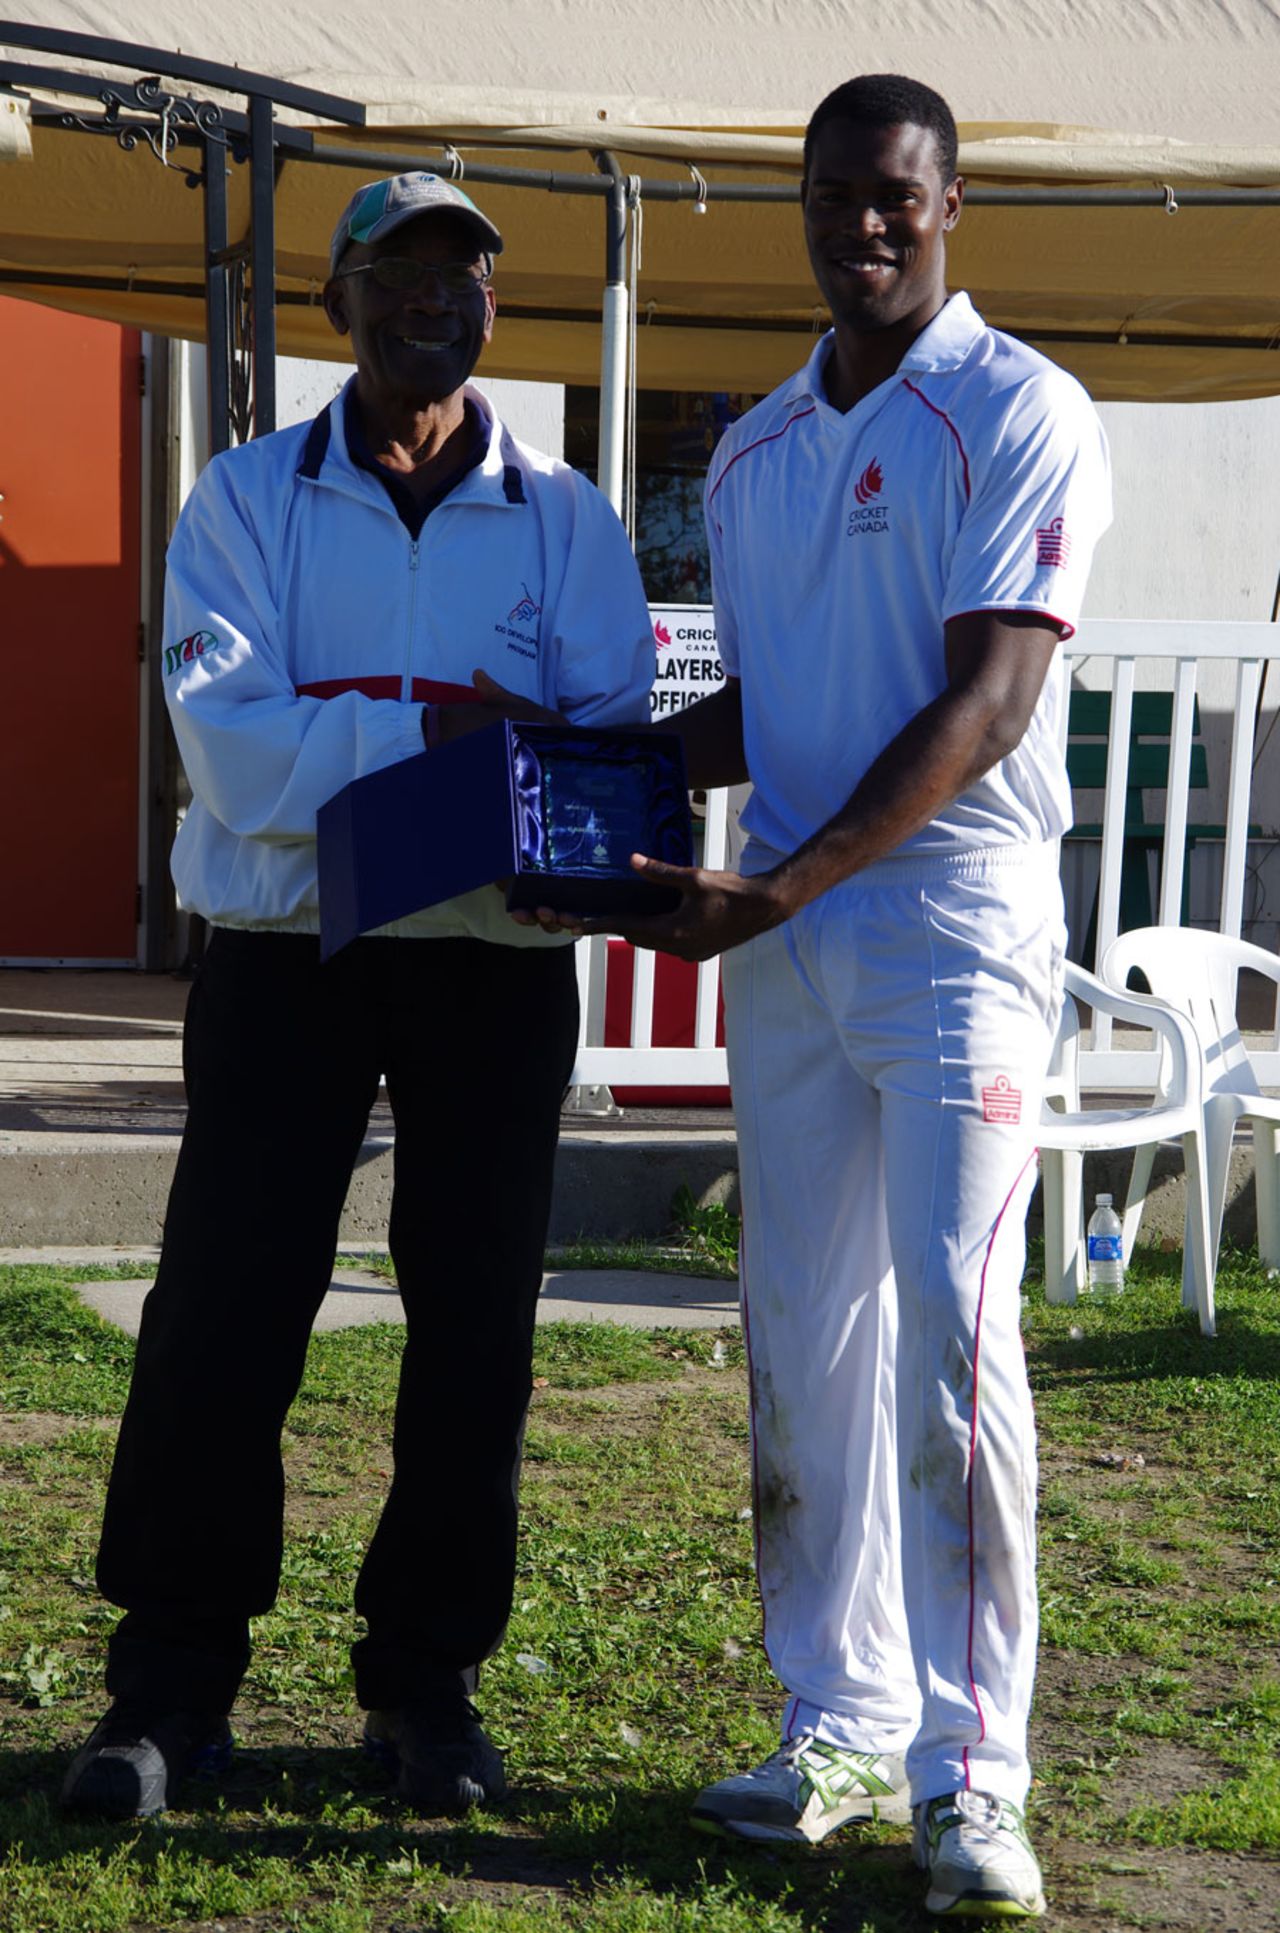 Jeremy Gordon with his Man-of-the-Match award, Canada v United Arab Emirates, ICC Intercontinental Cup, 4th day, King City, August 4, 2013